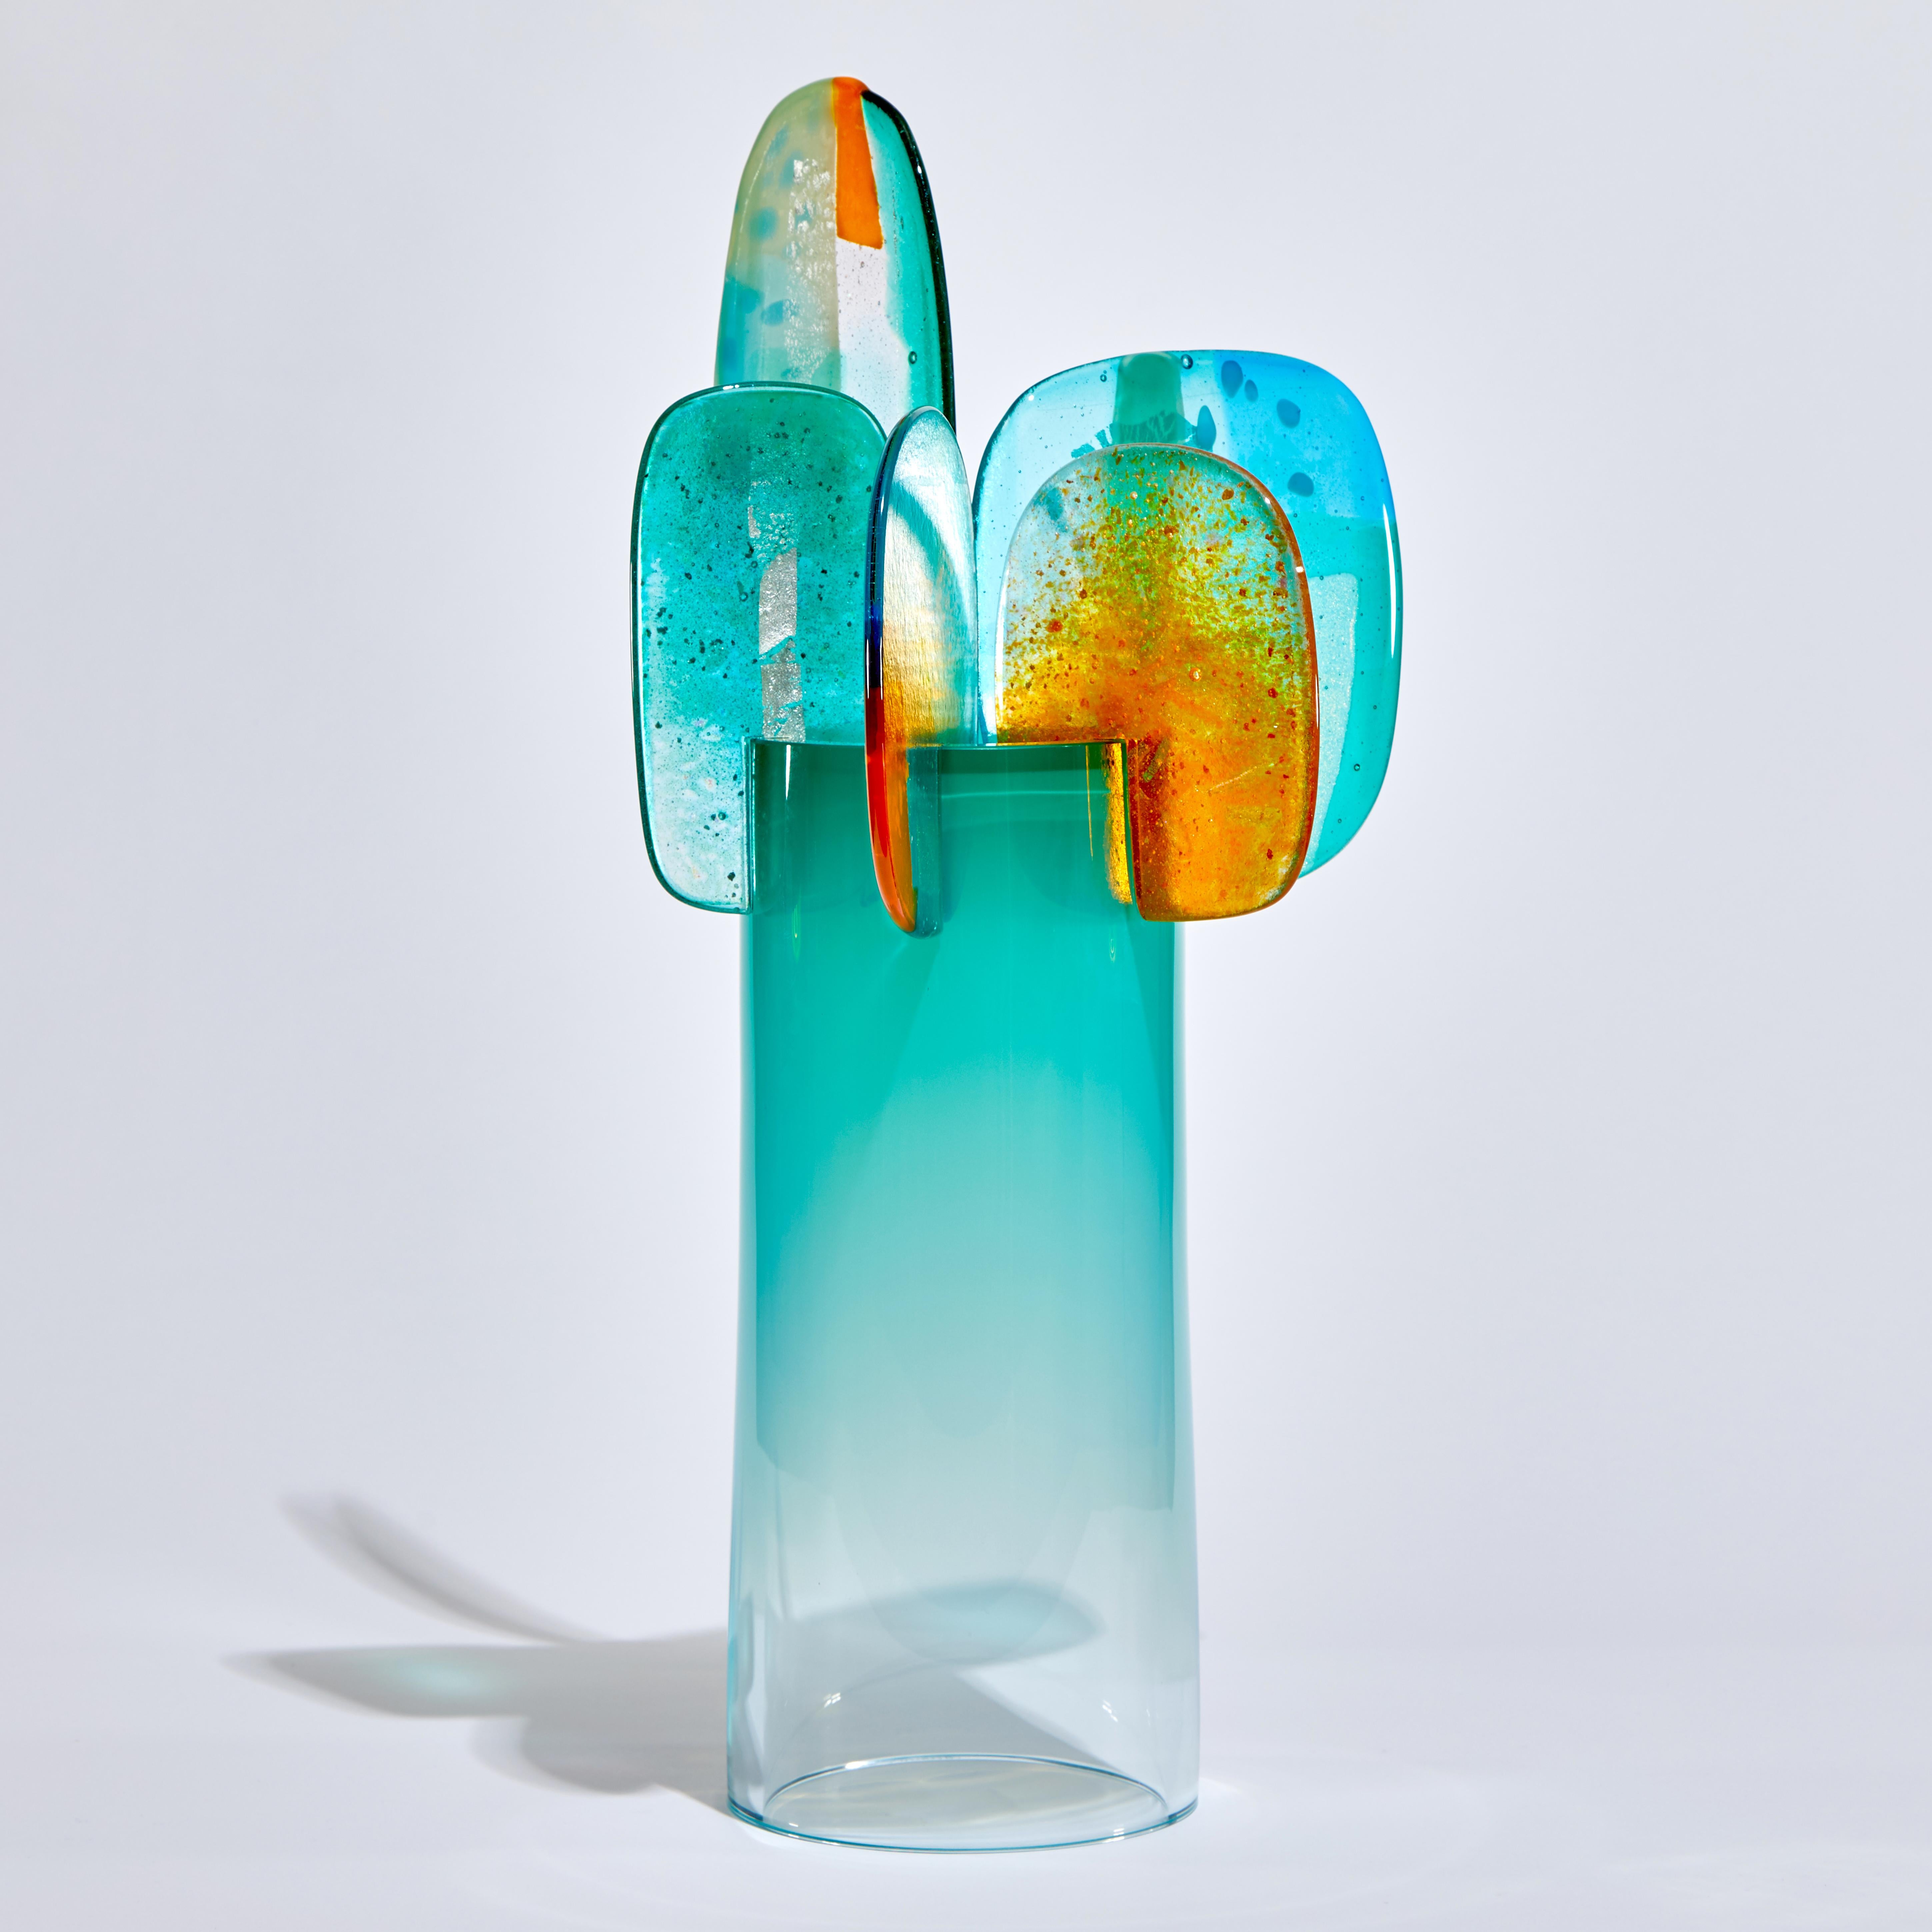 British Paradise 01 in Emerald, Green, Jade & Orange Glass Sculpture by Amy Cushing